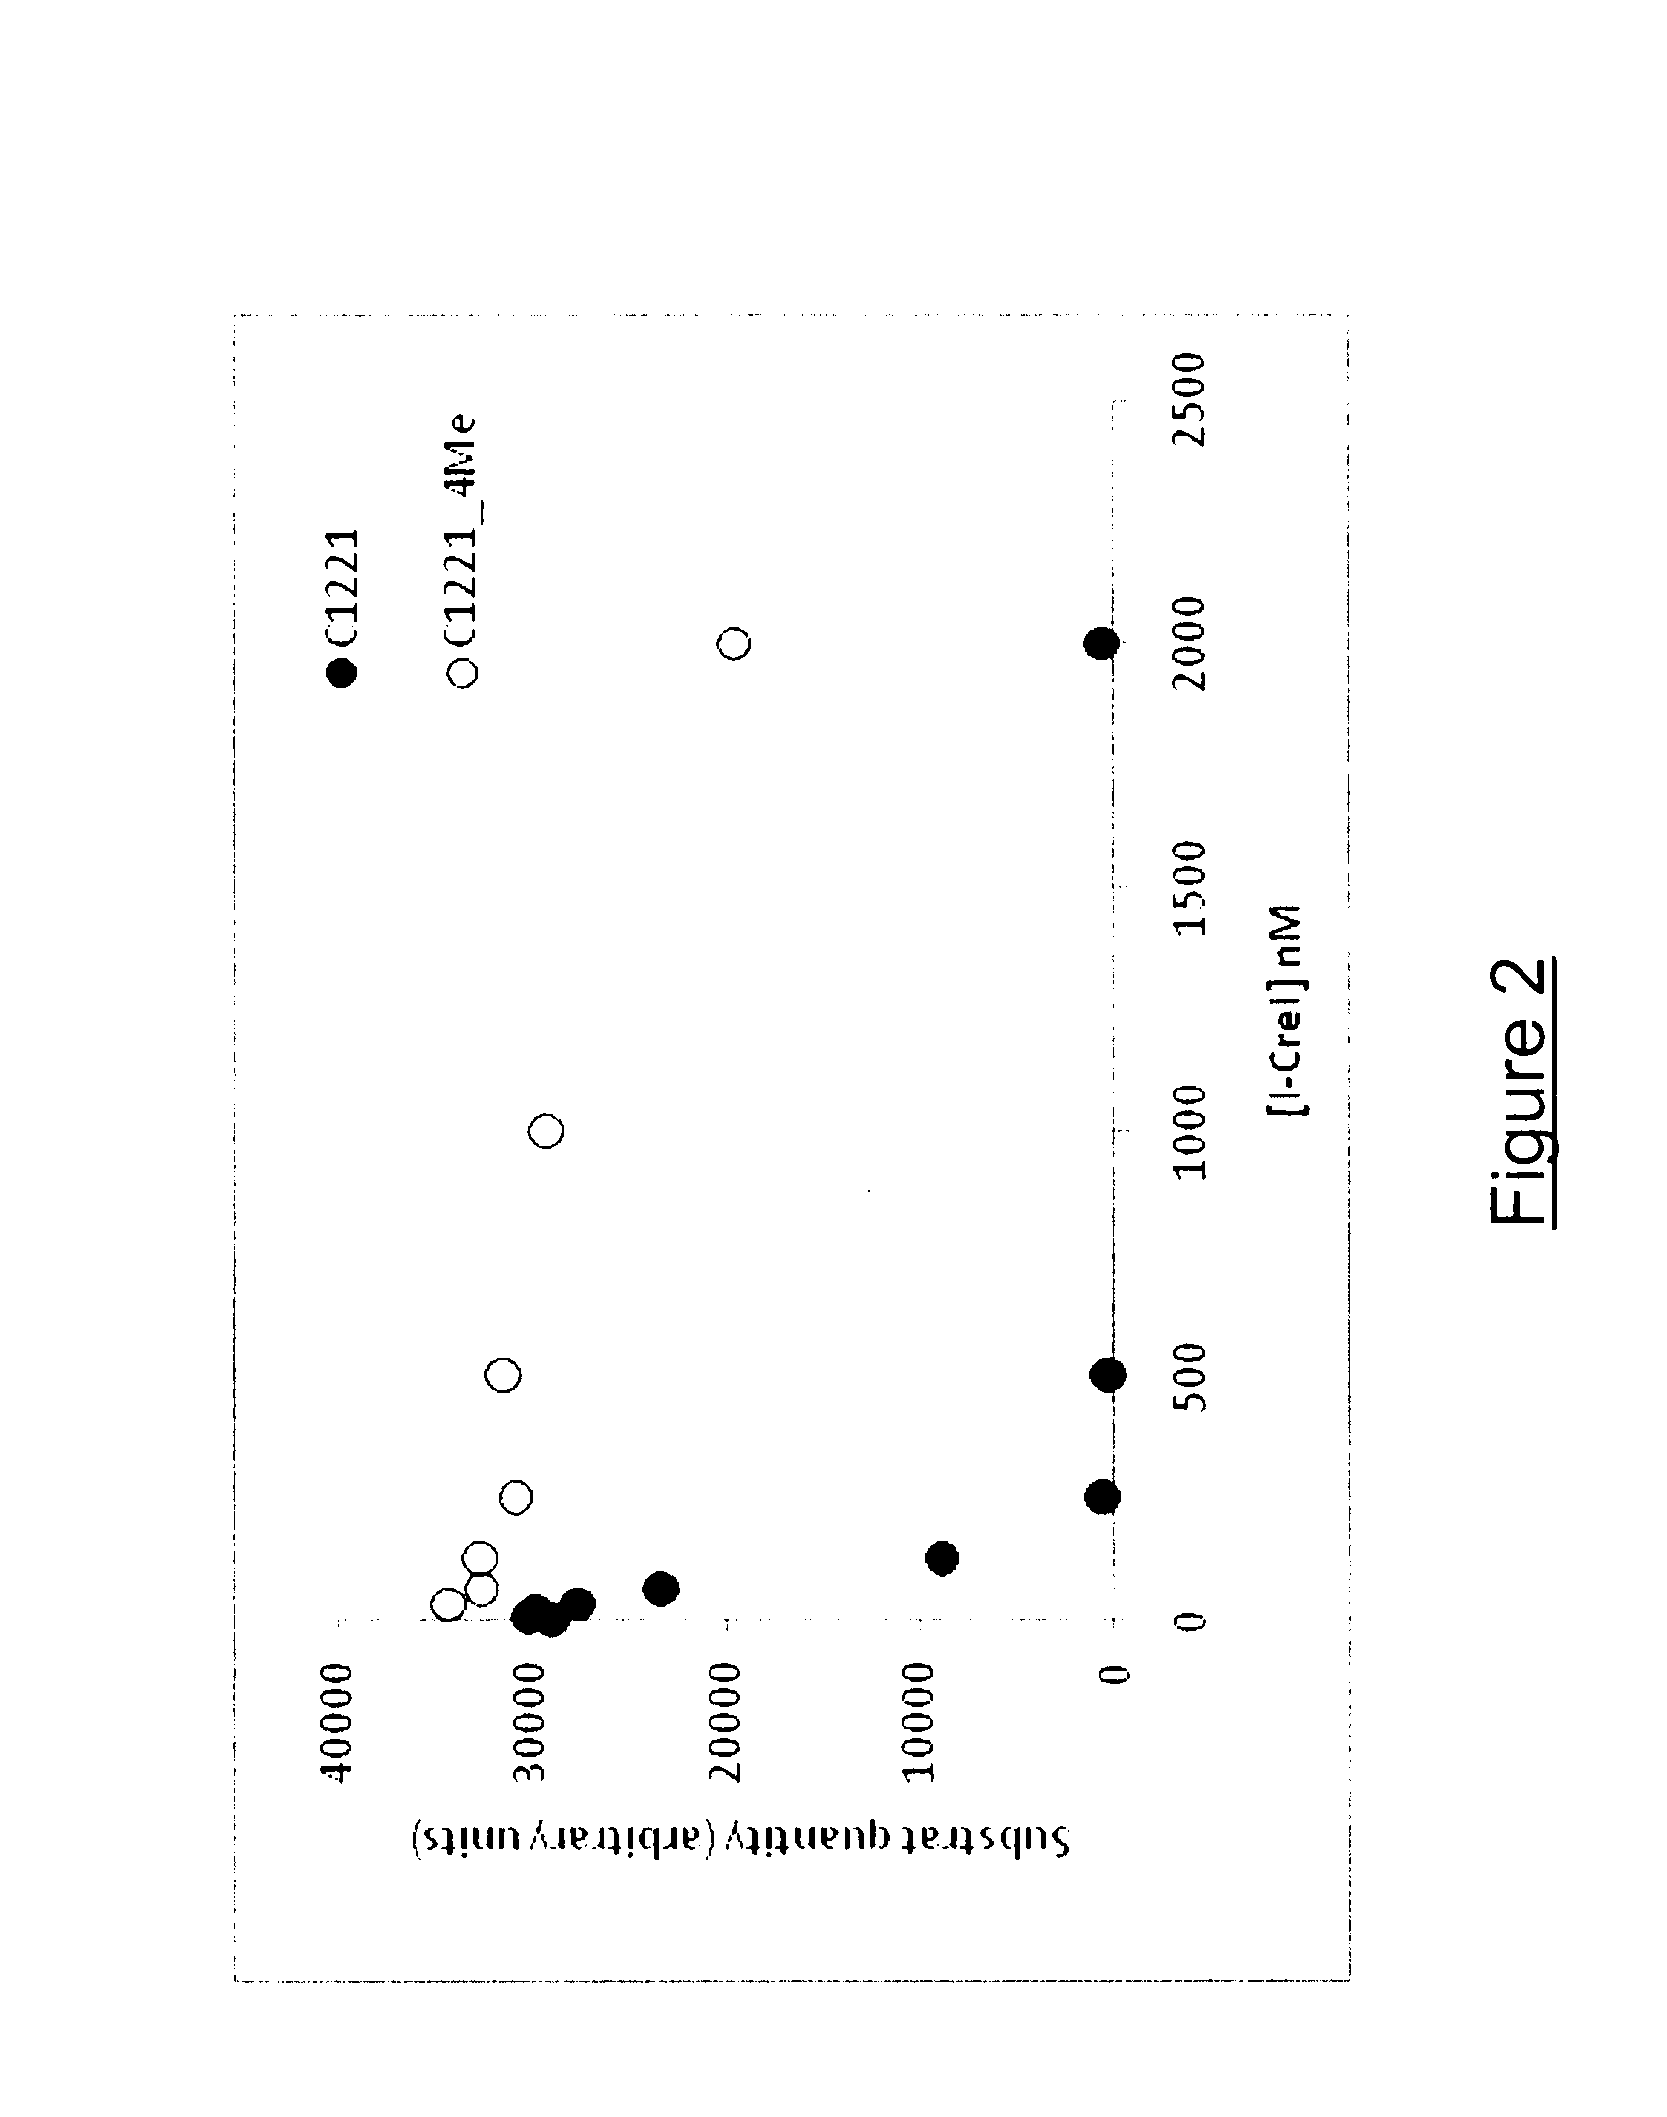 Method for improving cleavage of DNA by endonuclease sensitive to methylation